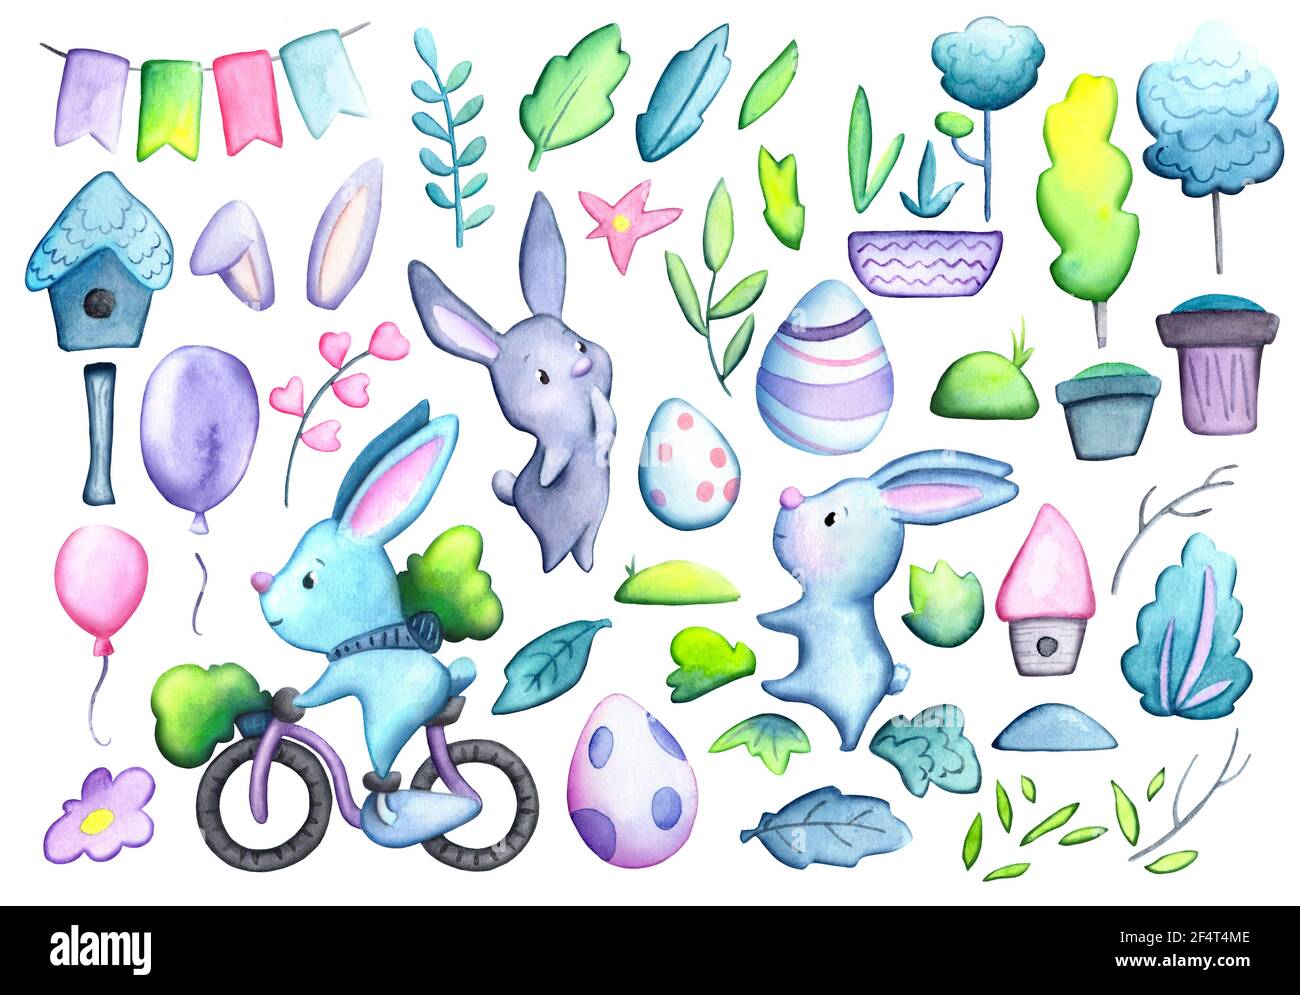 Cute rabbits and Easter eggs spring watercolor clipart on white background. Bunny character and painted eggs for Easter seasonal greetings. Spring tim Stock Photo